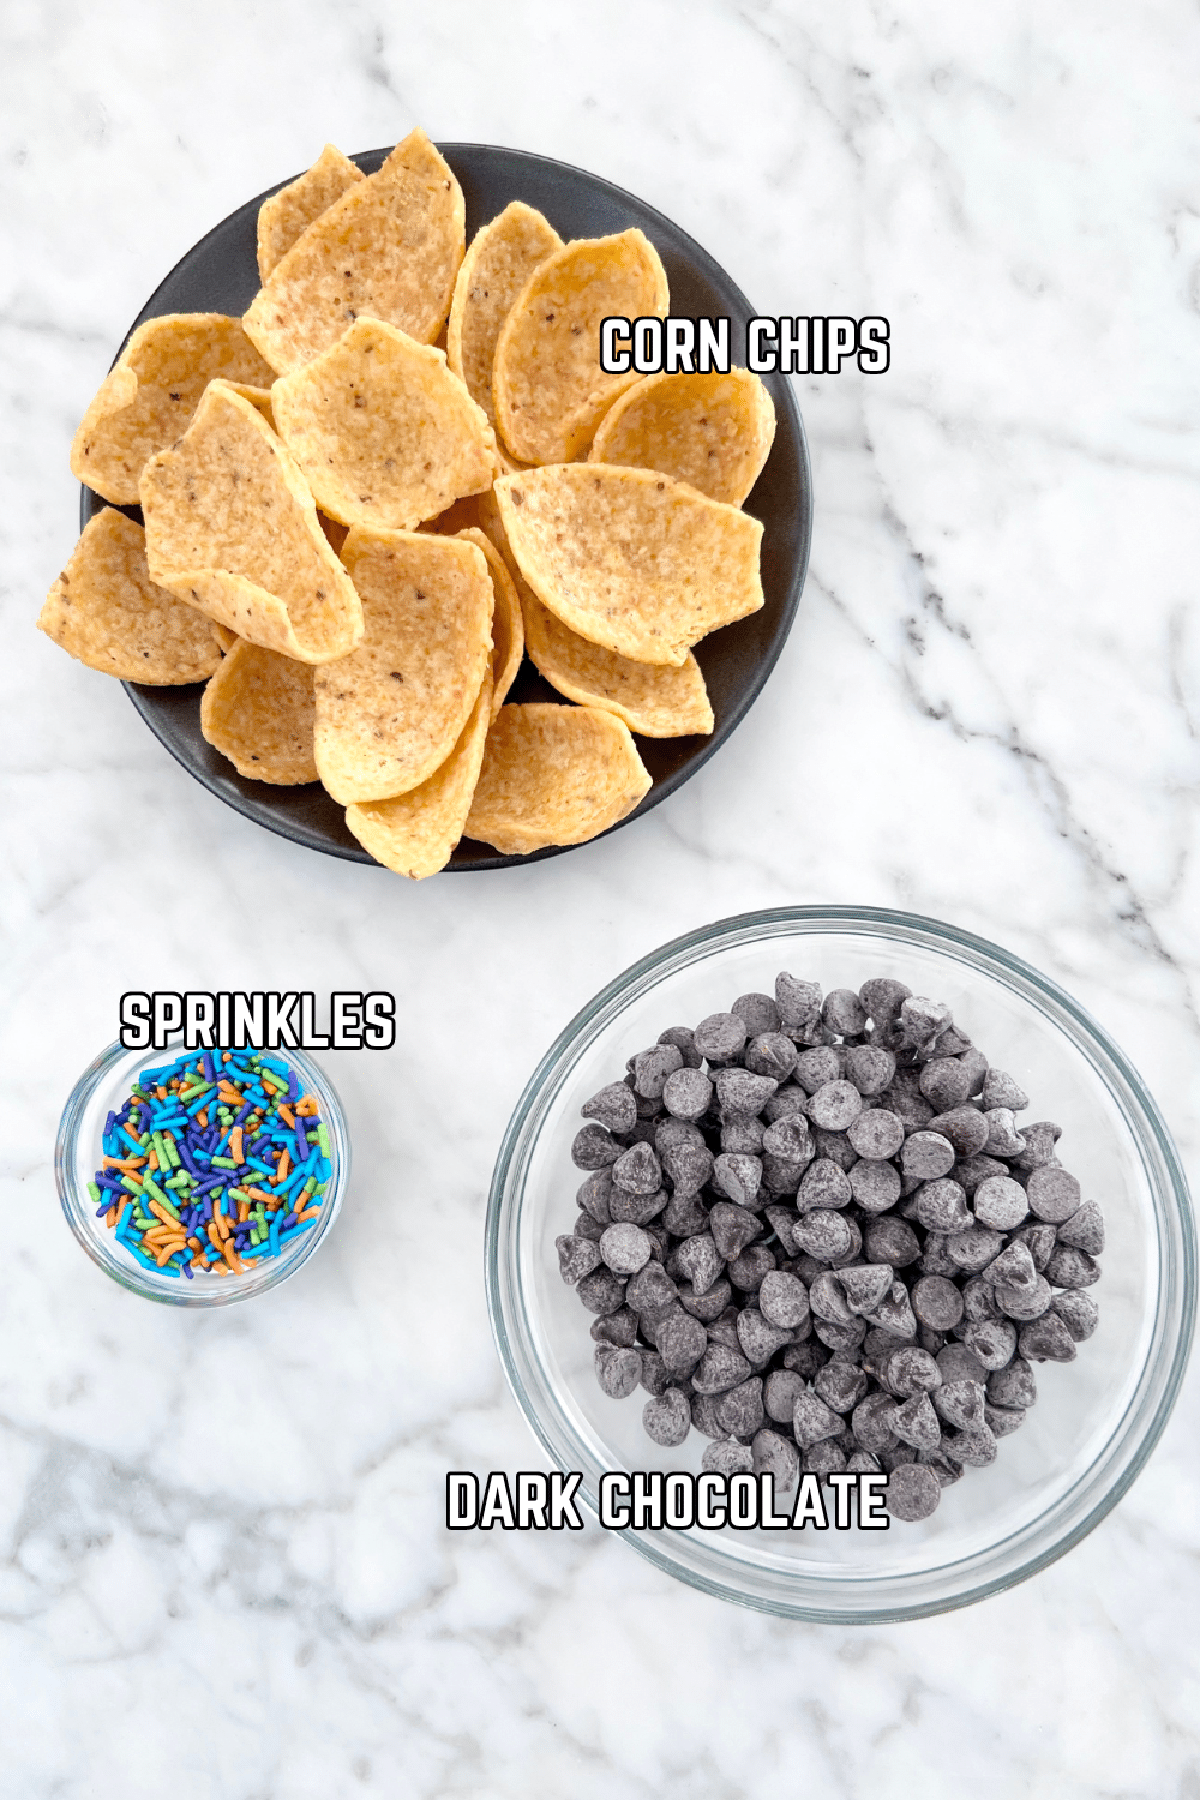 Three bowls of ingredients to make chocolate dipped corn chips: chips, dark chocolate, and colorful sprinkles.